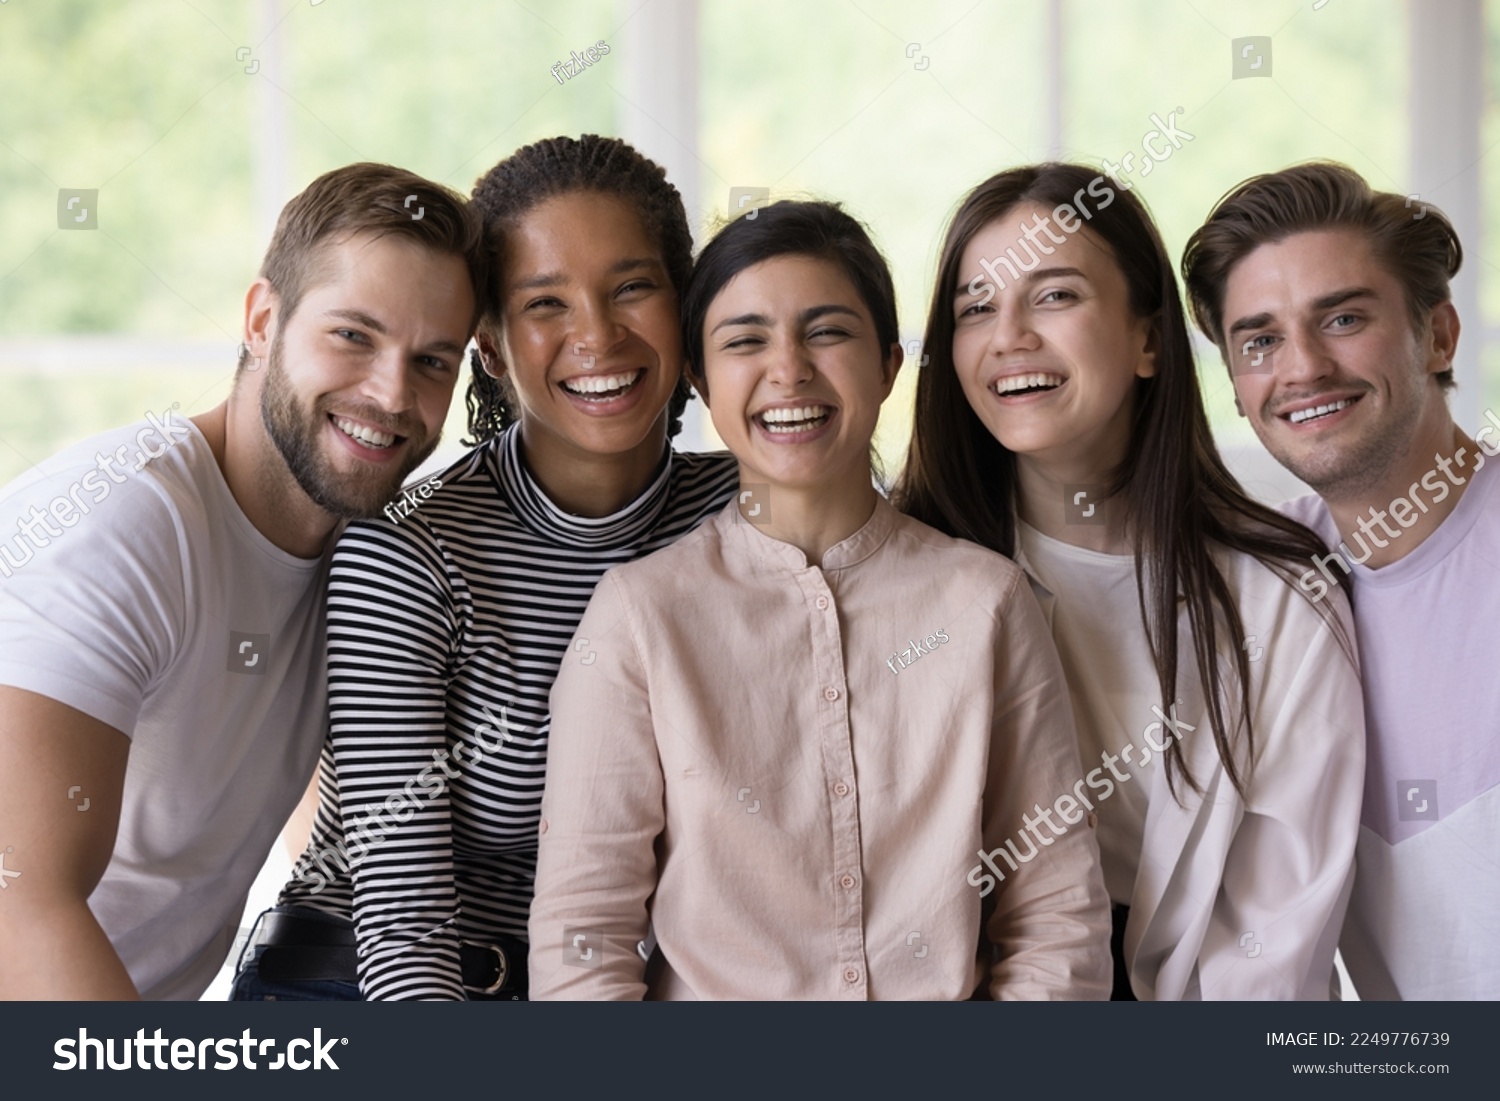 Multiethnic team of joyful happy students, interns, friends posing close together, looking at camera with toothy smiles, laughing, enjoying meeting, social communication, group success #2249776739